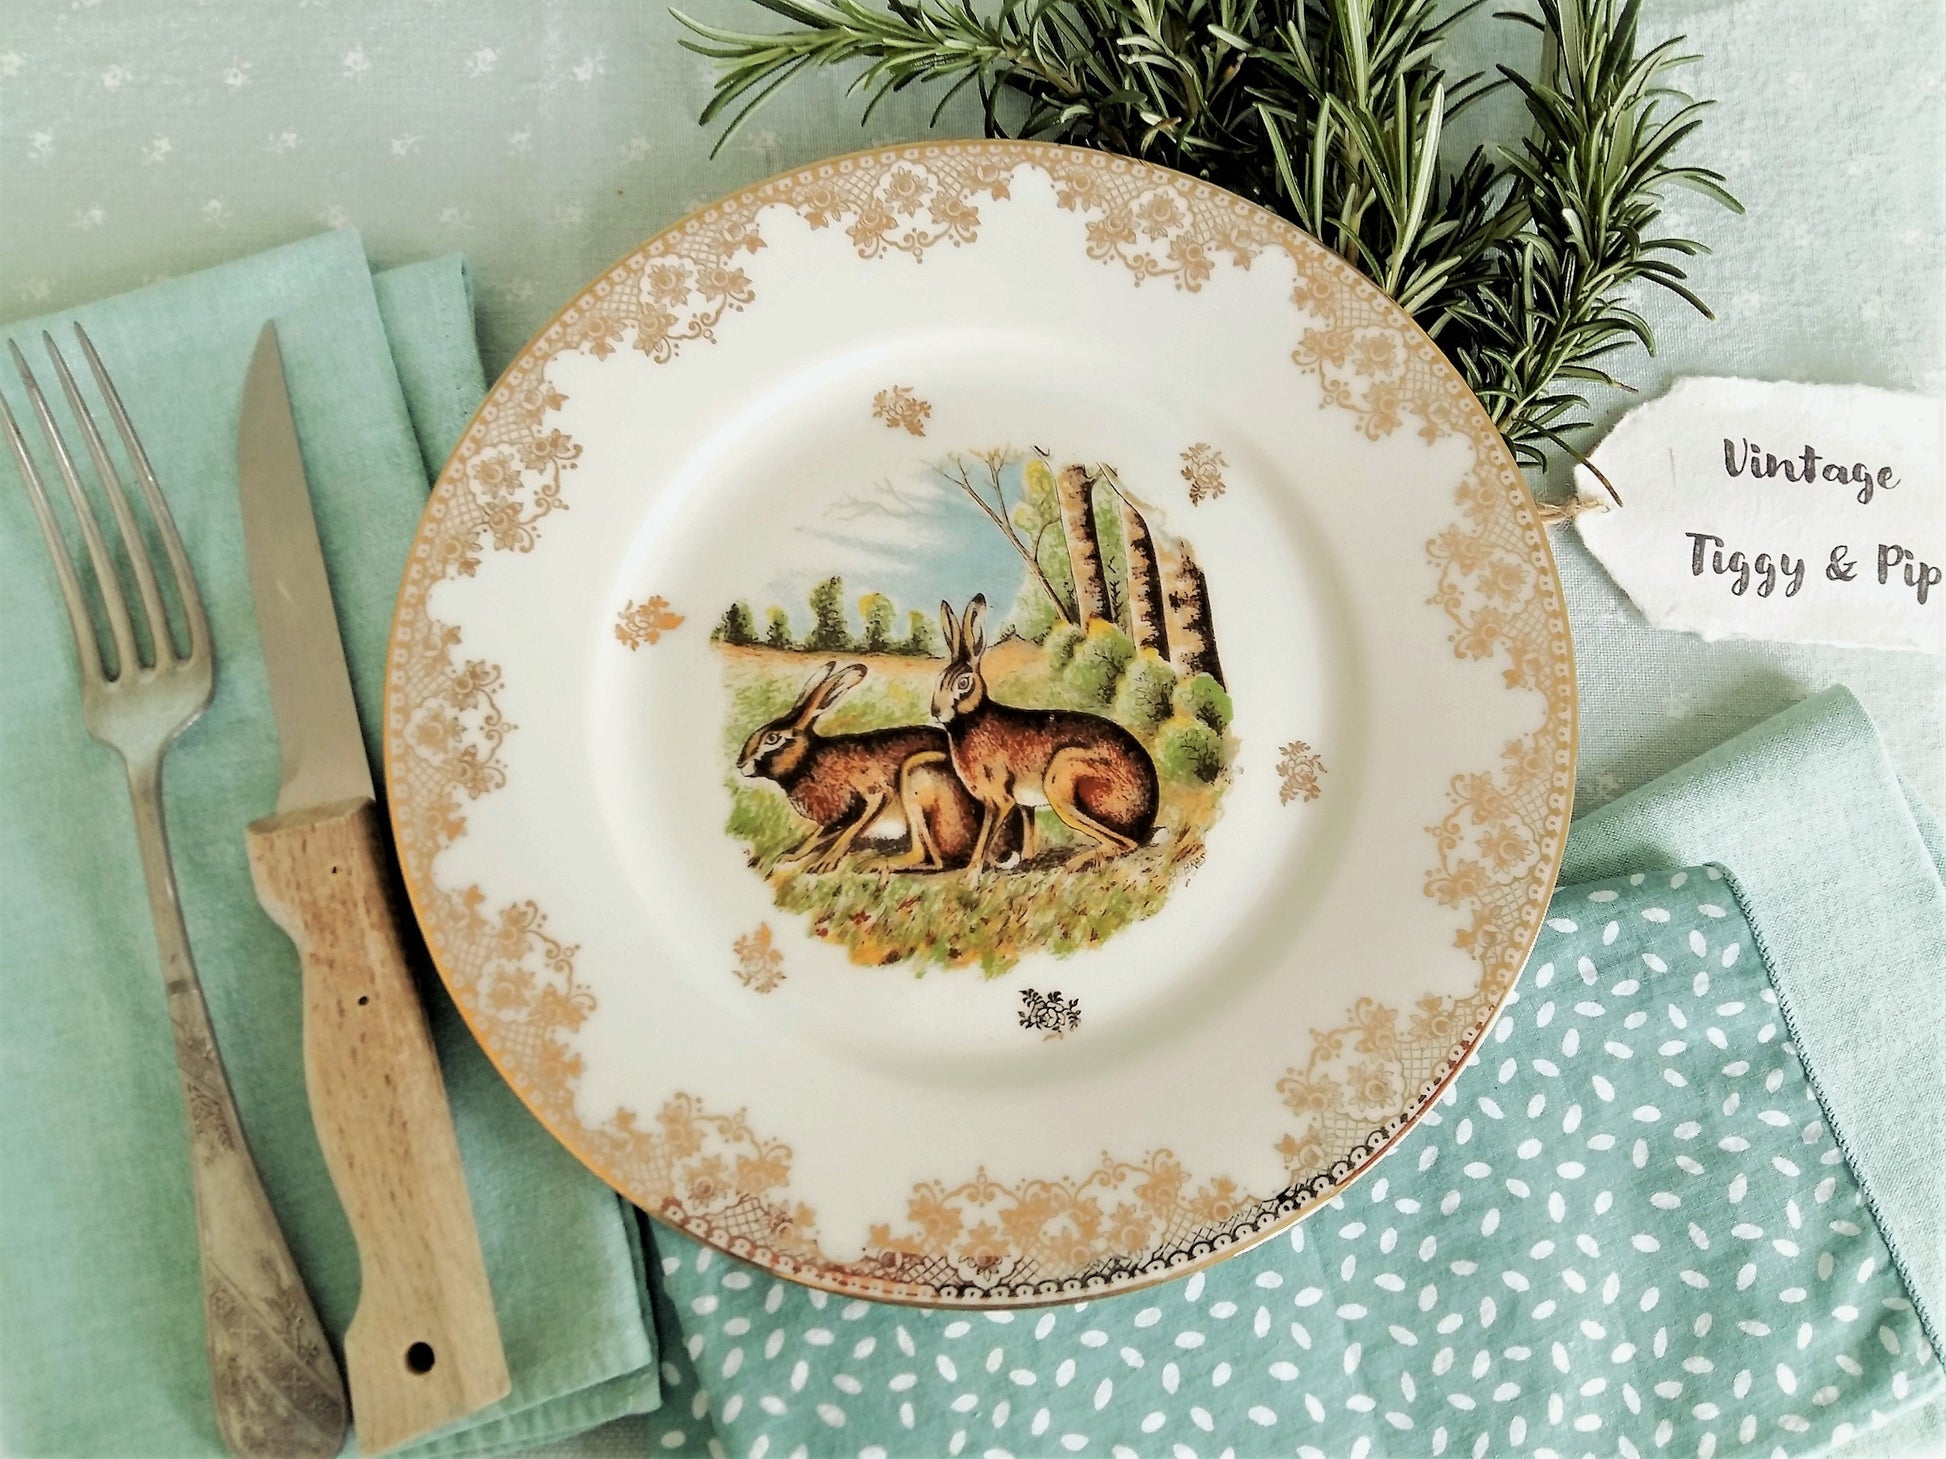 Six Limoges Game Dinner Plates. from Tiggy & Pip - €168.00! Shop now at Tiggy and Pip